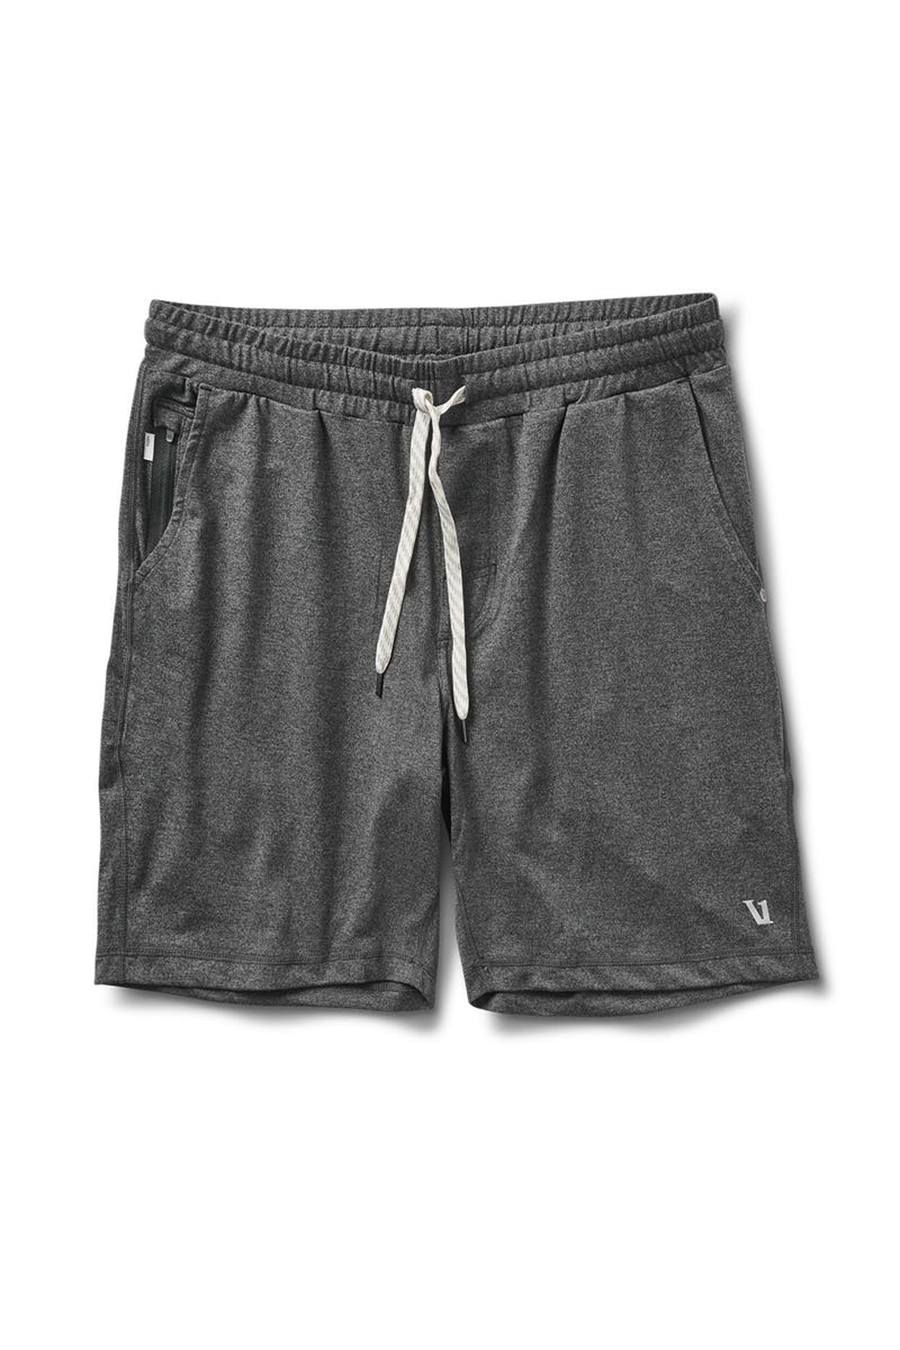 Ponto Short | Charcoal Heather - West of Camden - Main Image Number 3 of 3